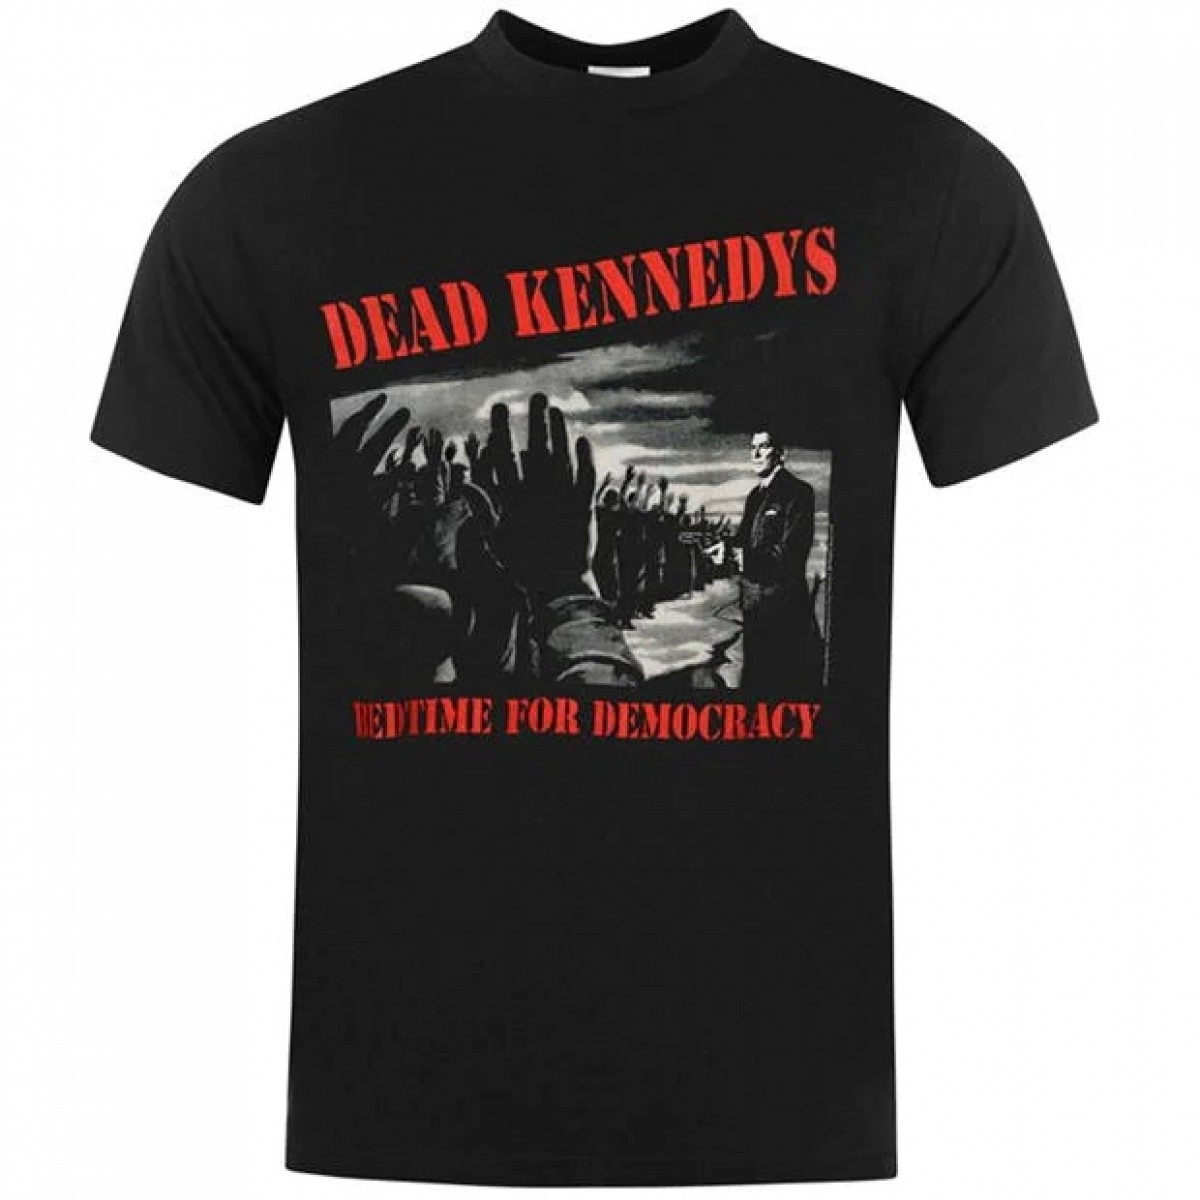 

Футболка Official Dead Kennedys Bedtime,  (44, Футболка Official Dead Kennedys Bedtime, S (44)